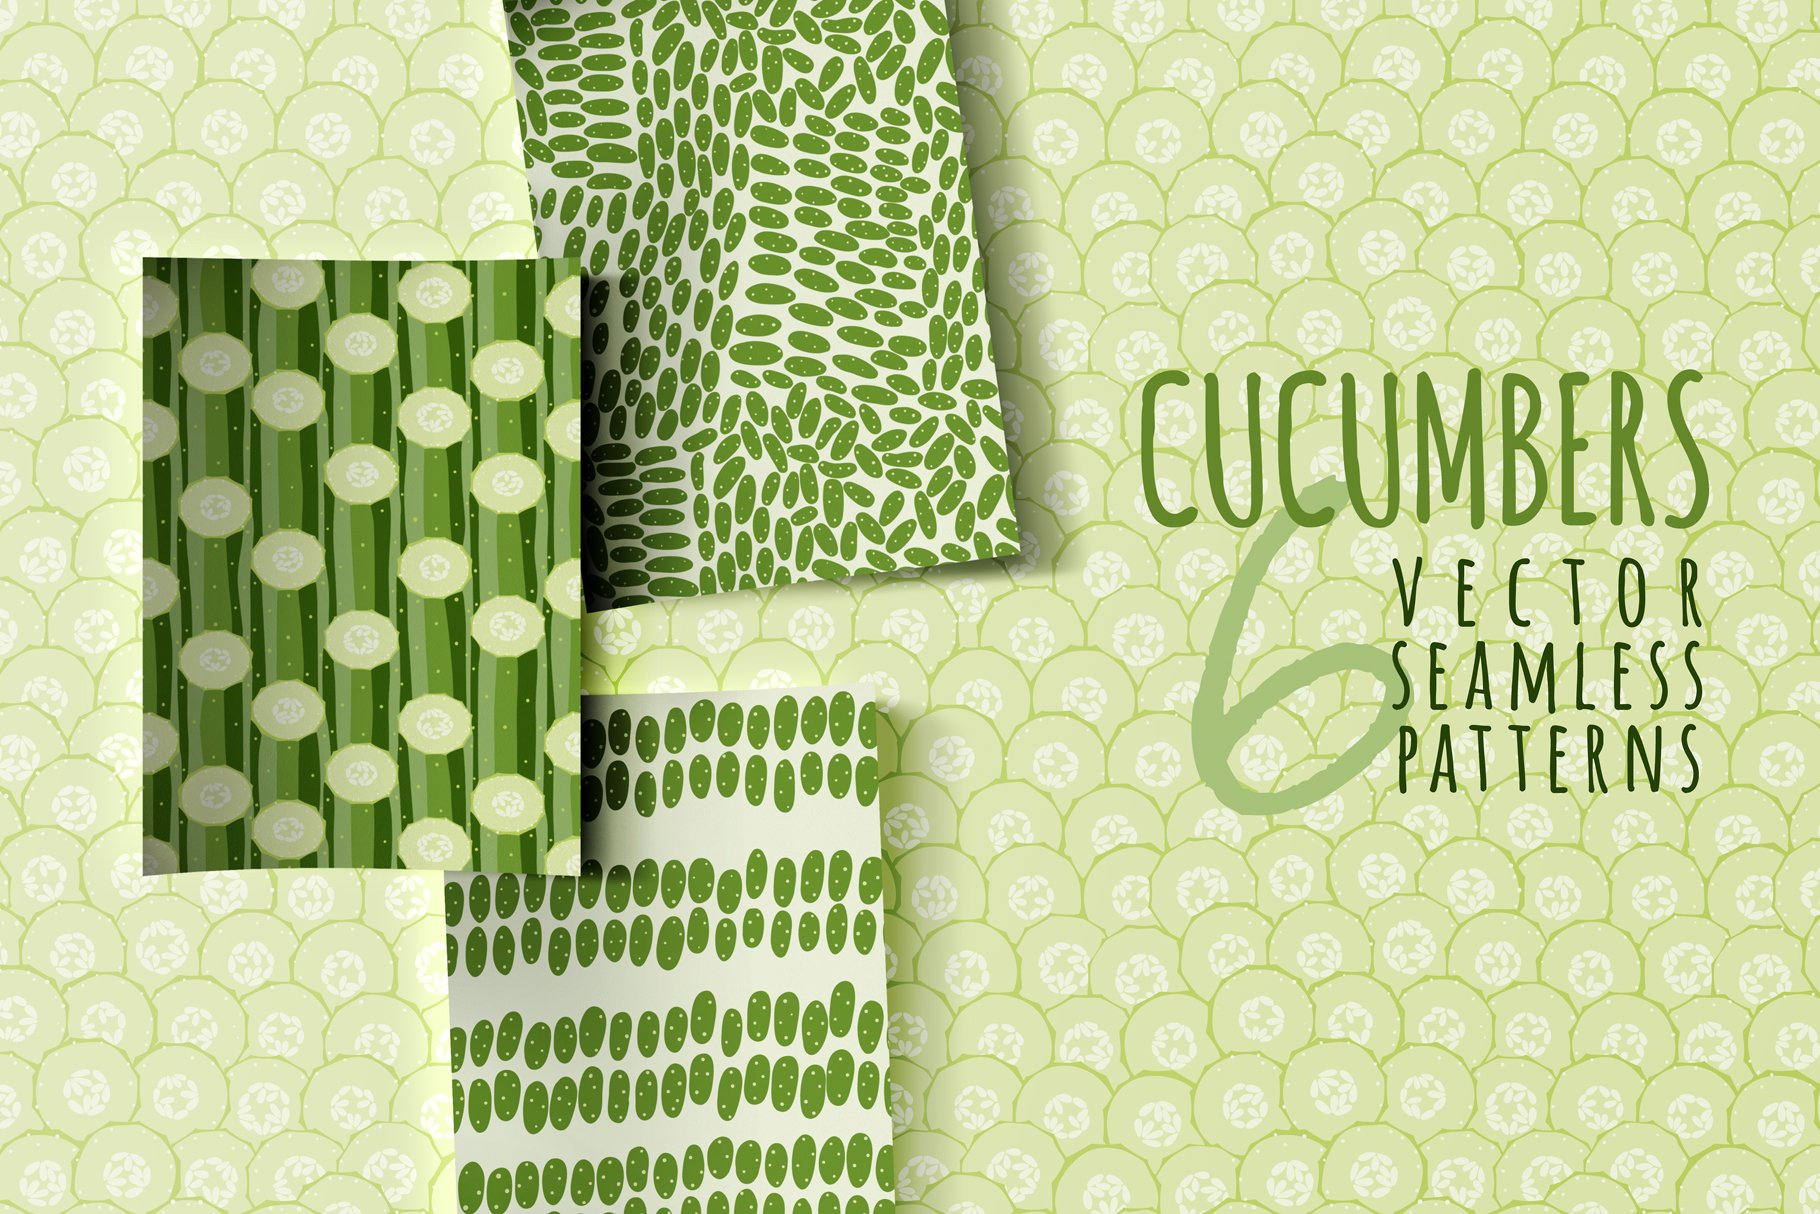 Cucumbers, 6 seamless patterns cover image.